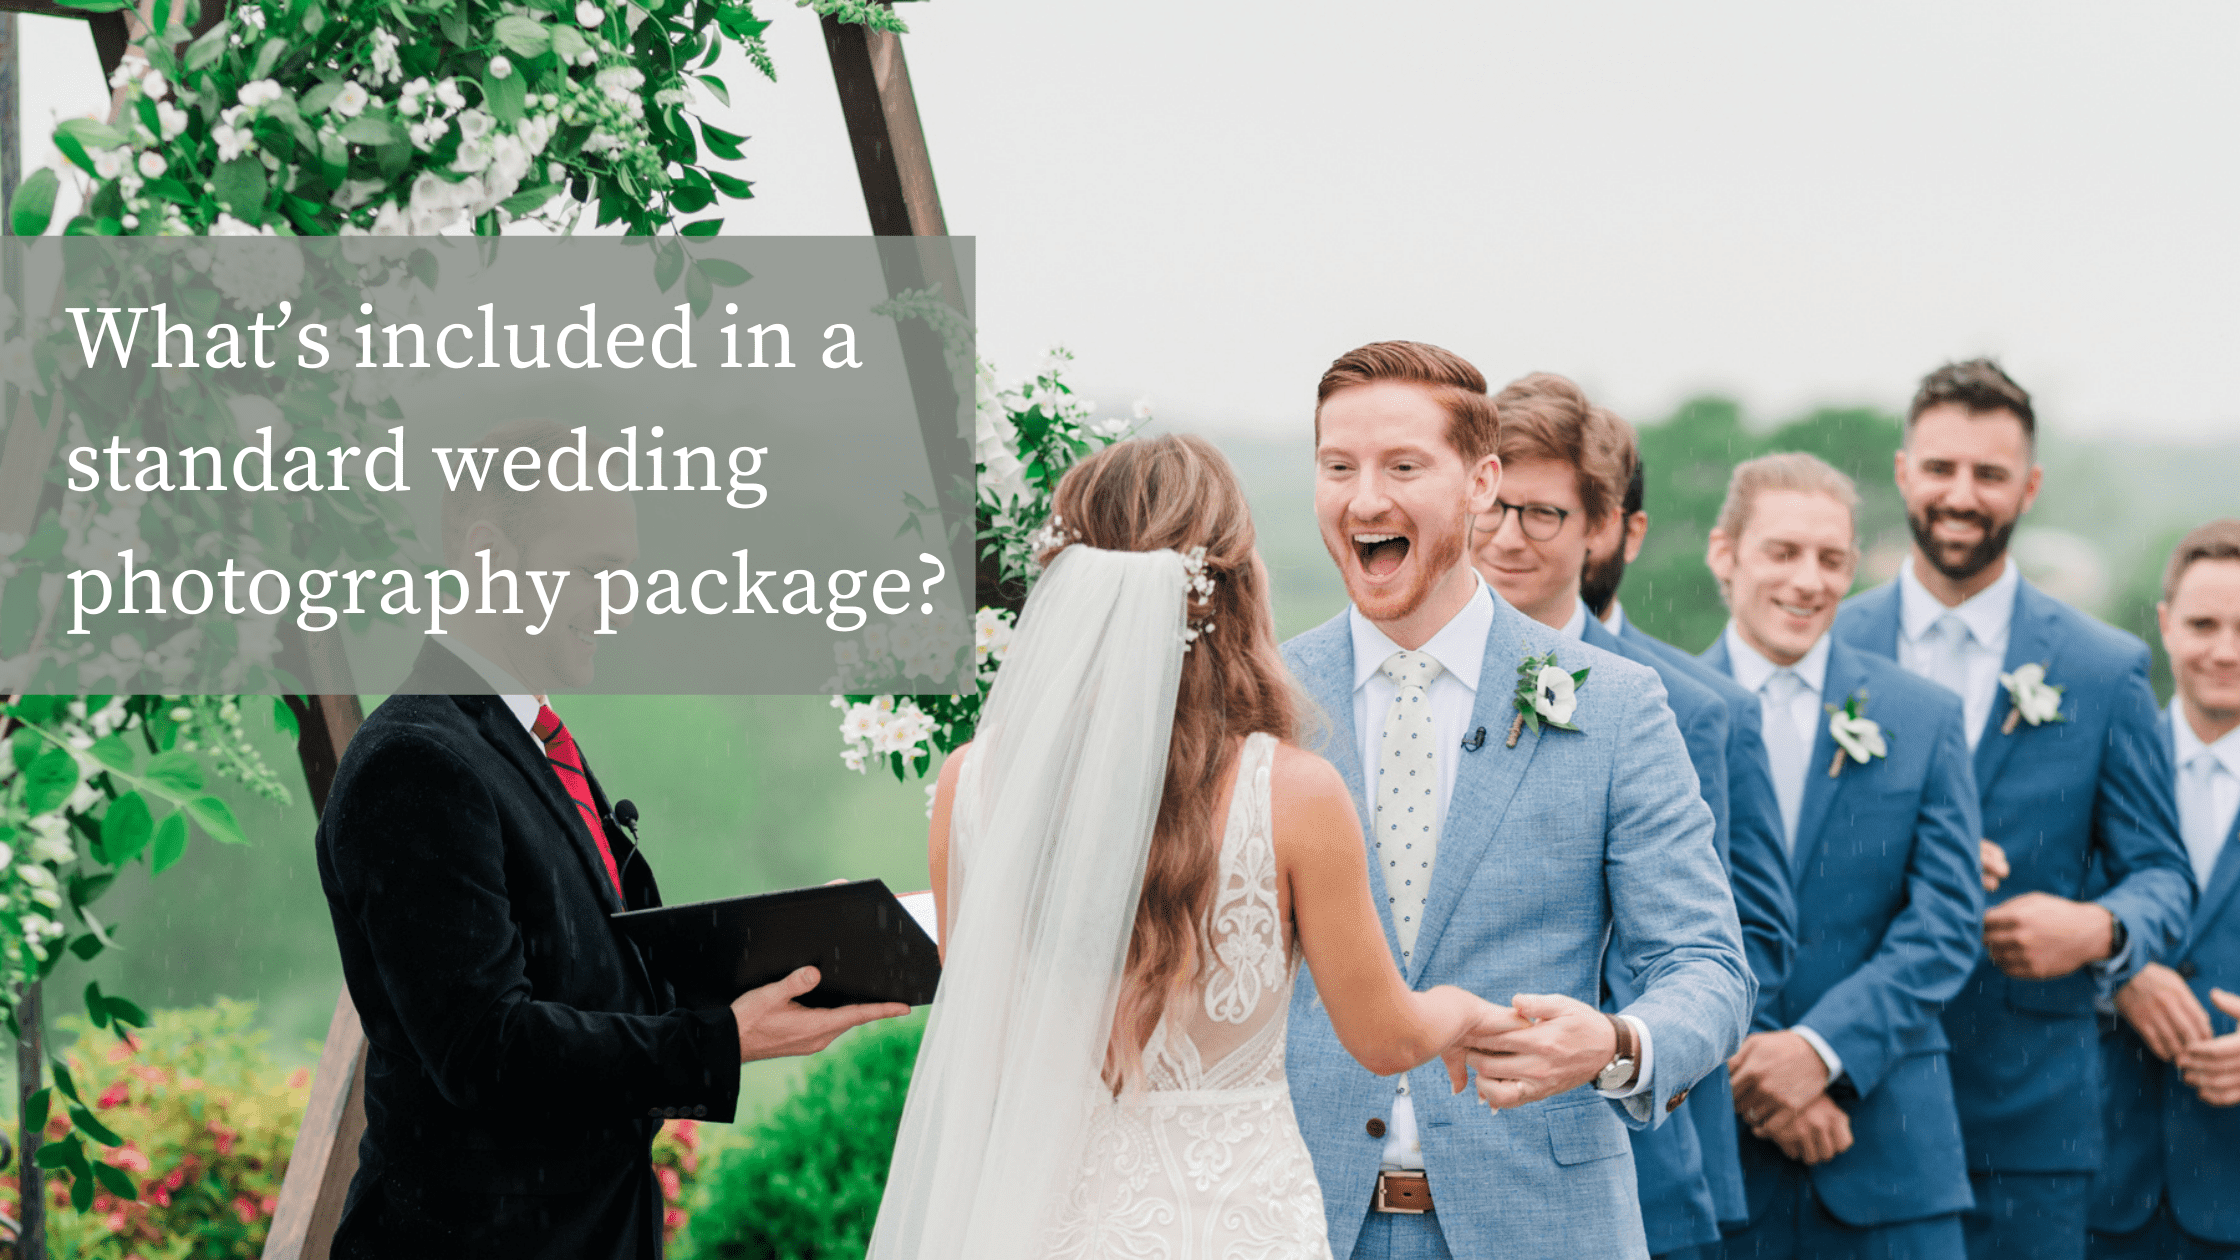 Dramatic image of groom's excited face just before they are announced husband and wife during a wedding ceremony. Left overlay on the left reads: "What’s included in a wedding photography package?"